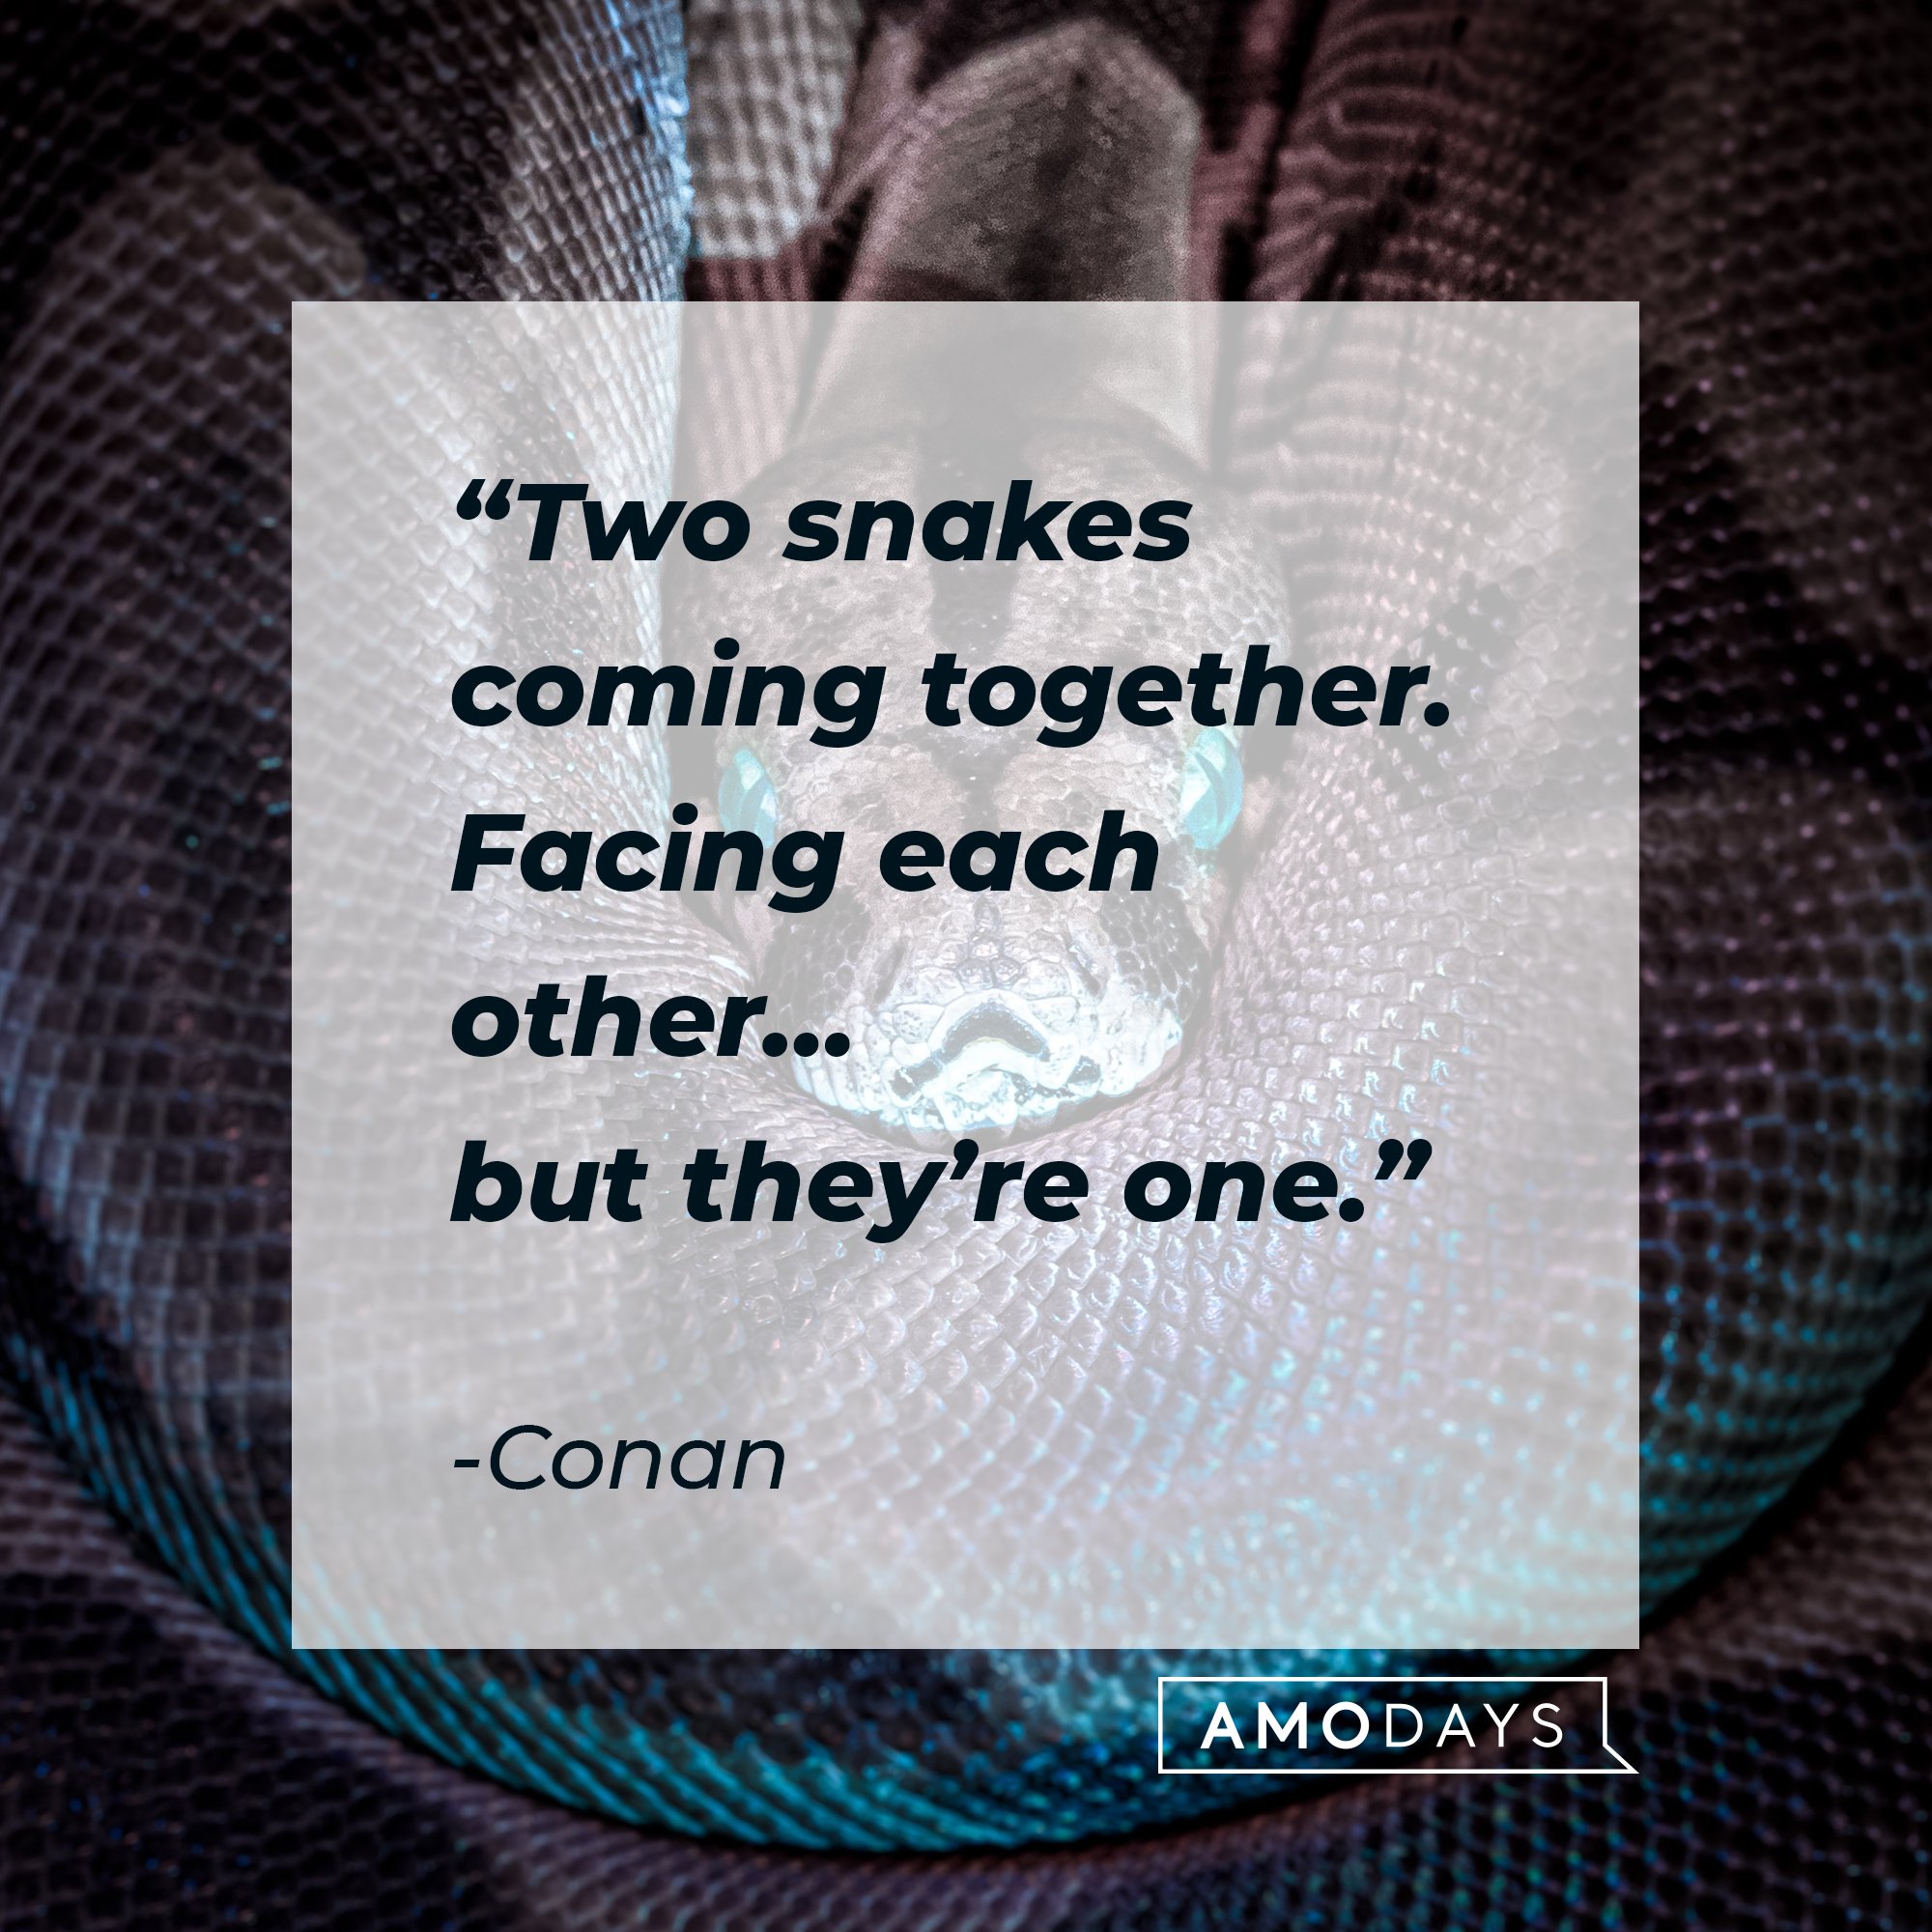  Conan's quote: “Two snakes coming together. Facing each other… but they’re one.” | Image; AmoDays